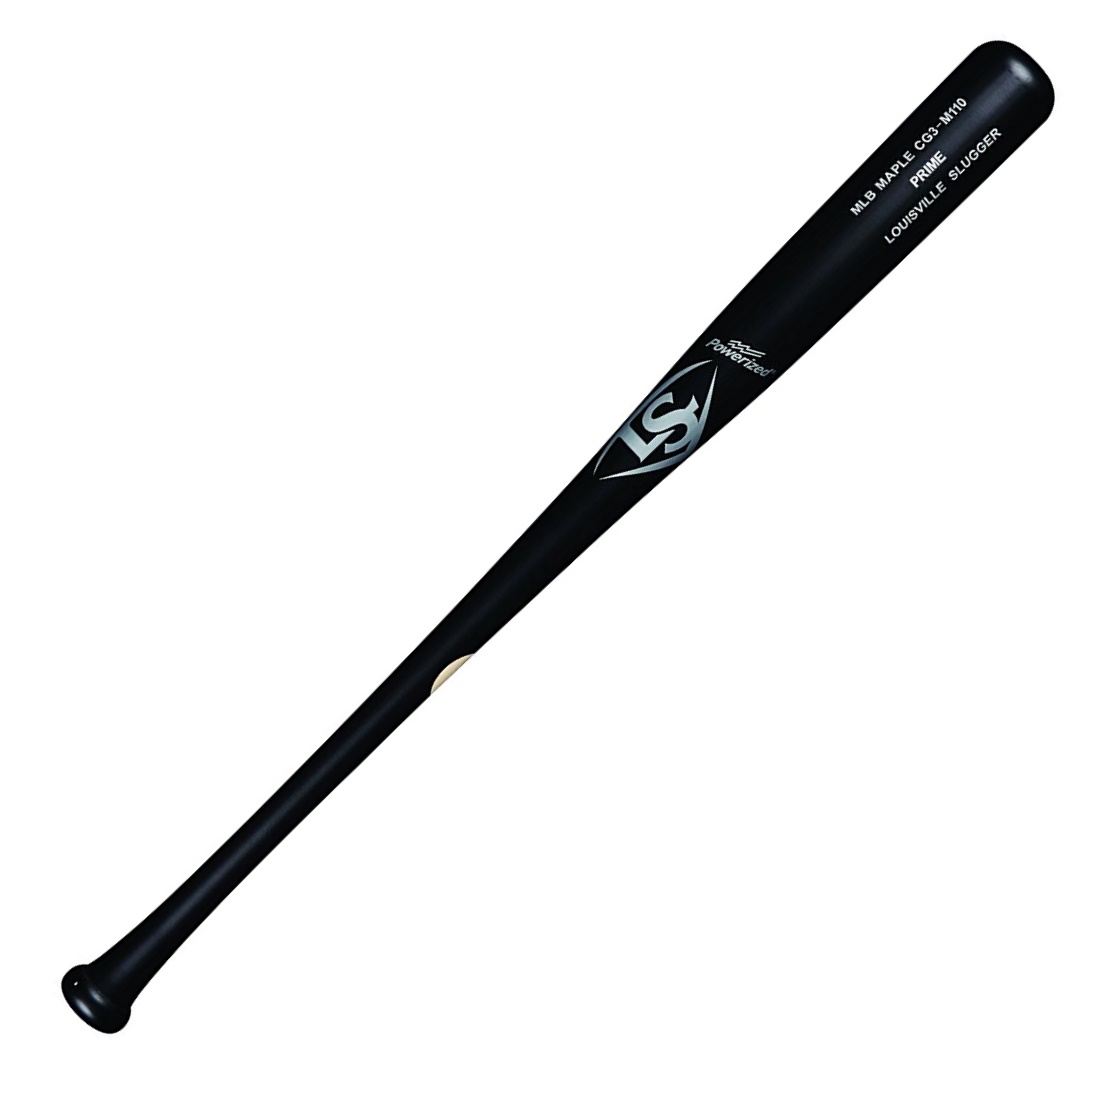 Curtis Granderson took the M110, one of Louisville Slugger's top five most popular turning models at the Major League level, and personalized it with a black matte finish. The M110, developed in 1944, is one of Louisville Slugger's oldest turning models still being used today and featurings the lightest swing weight of Louisville Slugger's PRIME models. This model uses a denser starting billet to create a more consistently hard bat and a slightly thicker handle for a balanced feel, giving you maximum control when you bring the bat through the zone. All MLB PRIME bats -- made exclusively with the MLB grade wood, a standard met by only 3% of our wood -- now feature EXOARMOR, a revolutionary finish that is twice the hardness of a regular bat. - New EXO ARMOR Finish - MLB Ink Dot Maple - Bone Rubbed - Cupped End - Large BarrelStandard Handle - Balanced Swing Weight - CG3-M110 Turning Model